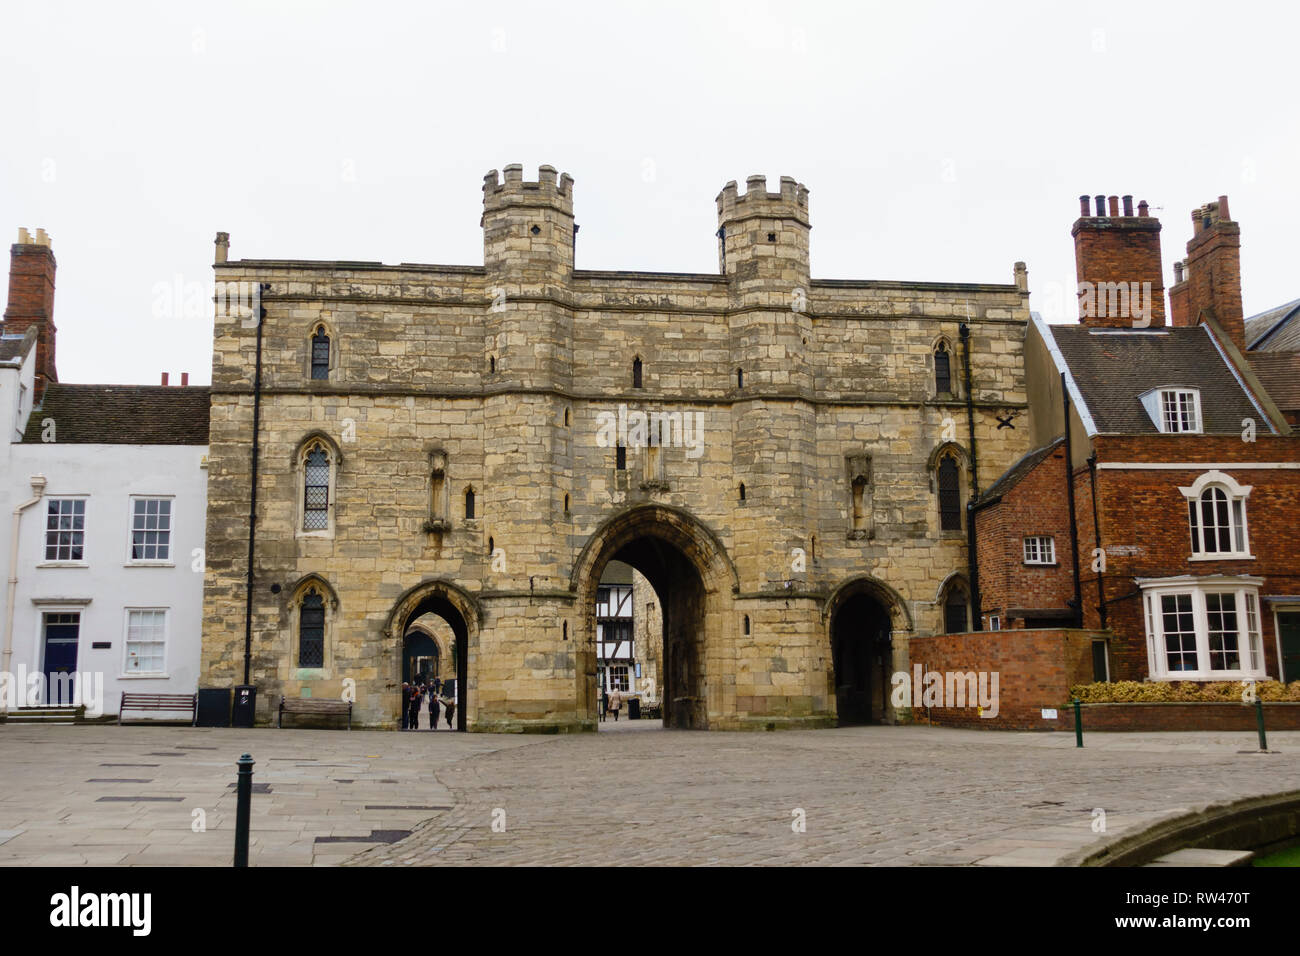 Exchequergate medieval gate house leading to Lincoln Cathedral, Lincolnshire, England Stock Photo